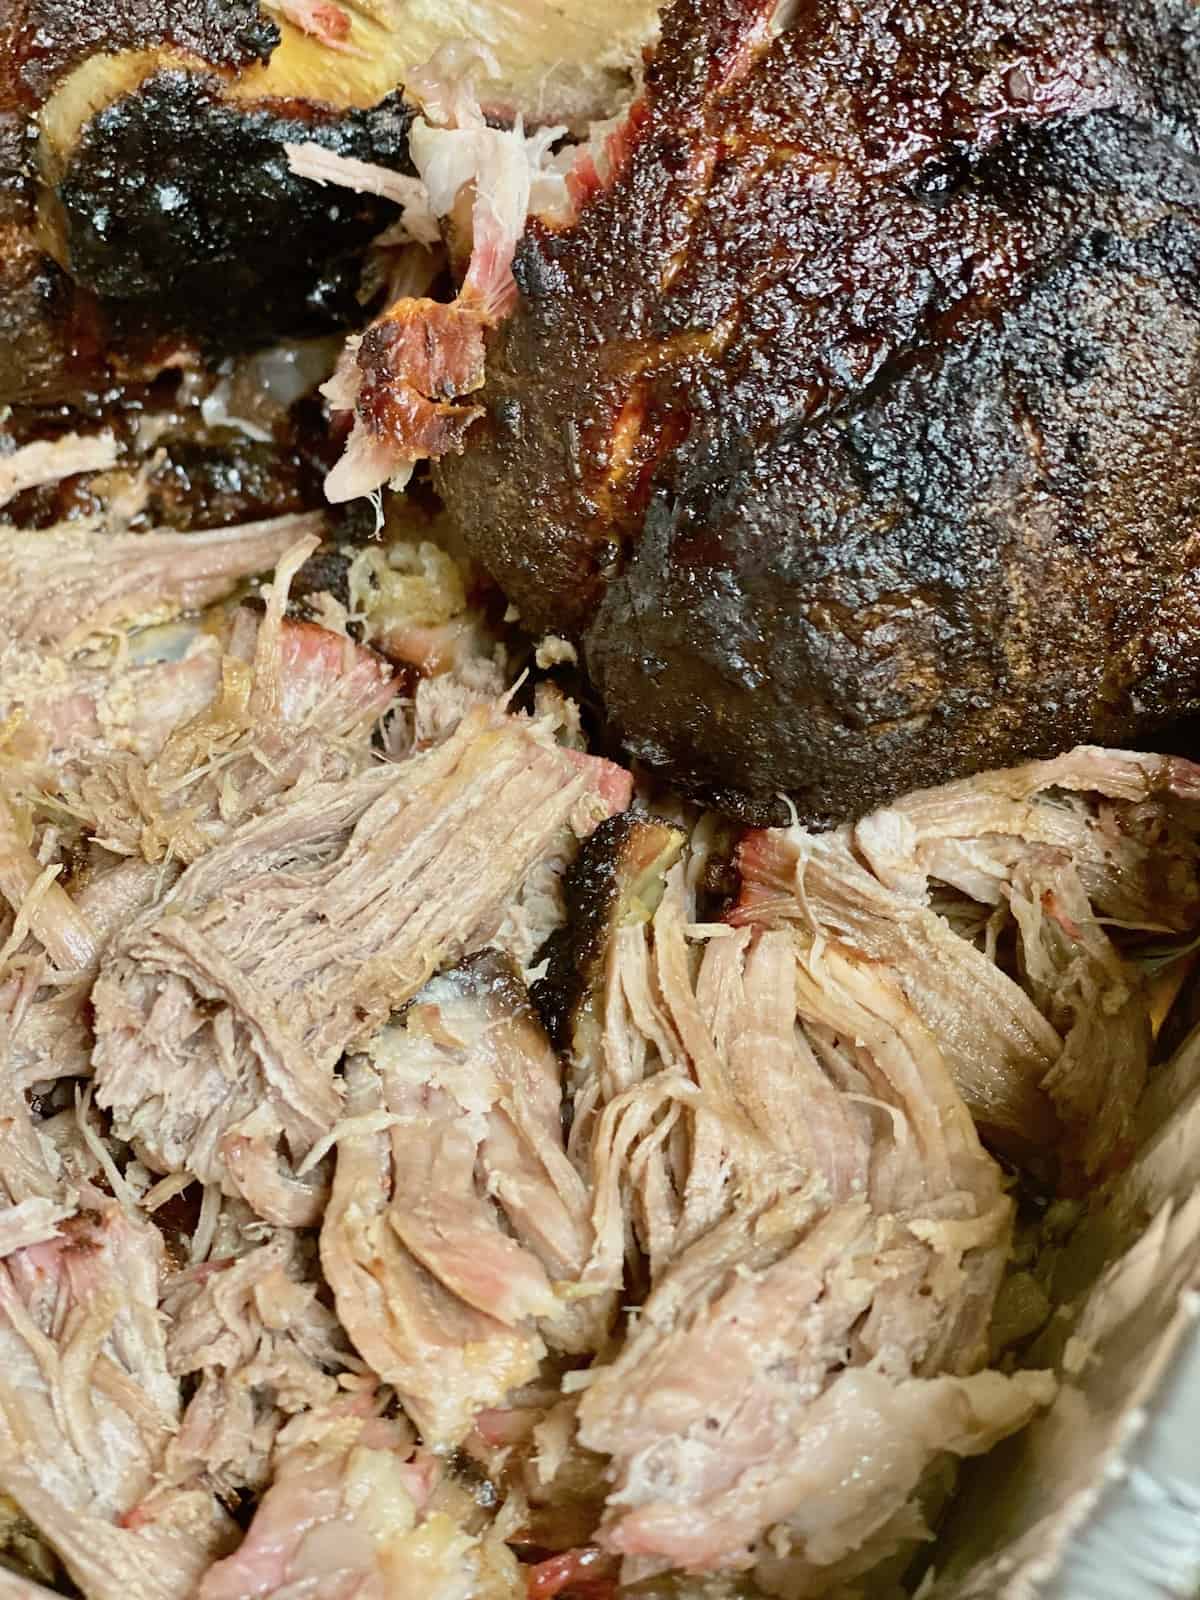 Smoked Pulled Pork Shoulder (pork butt) Closeup of the bark and the shredded cooked pork roast